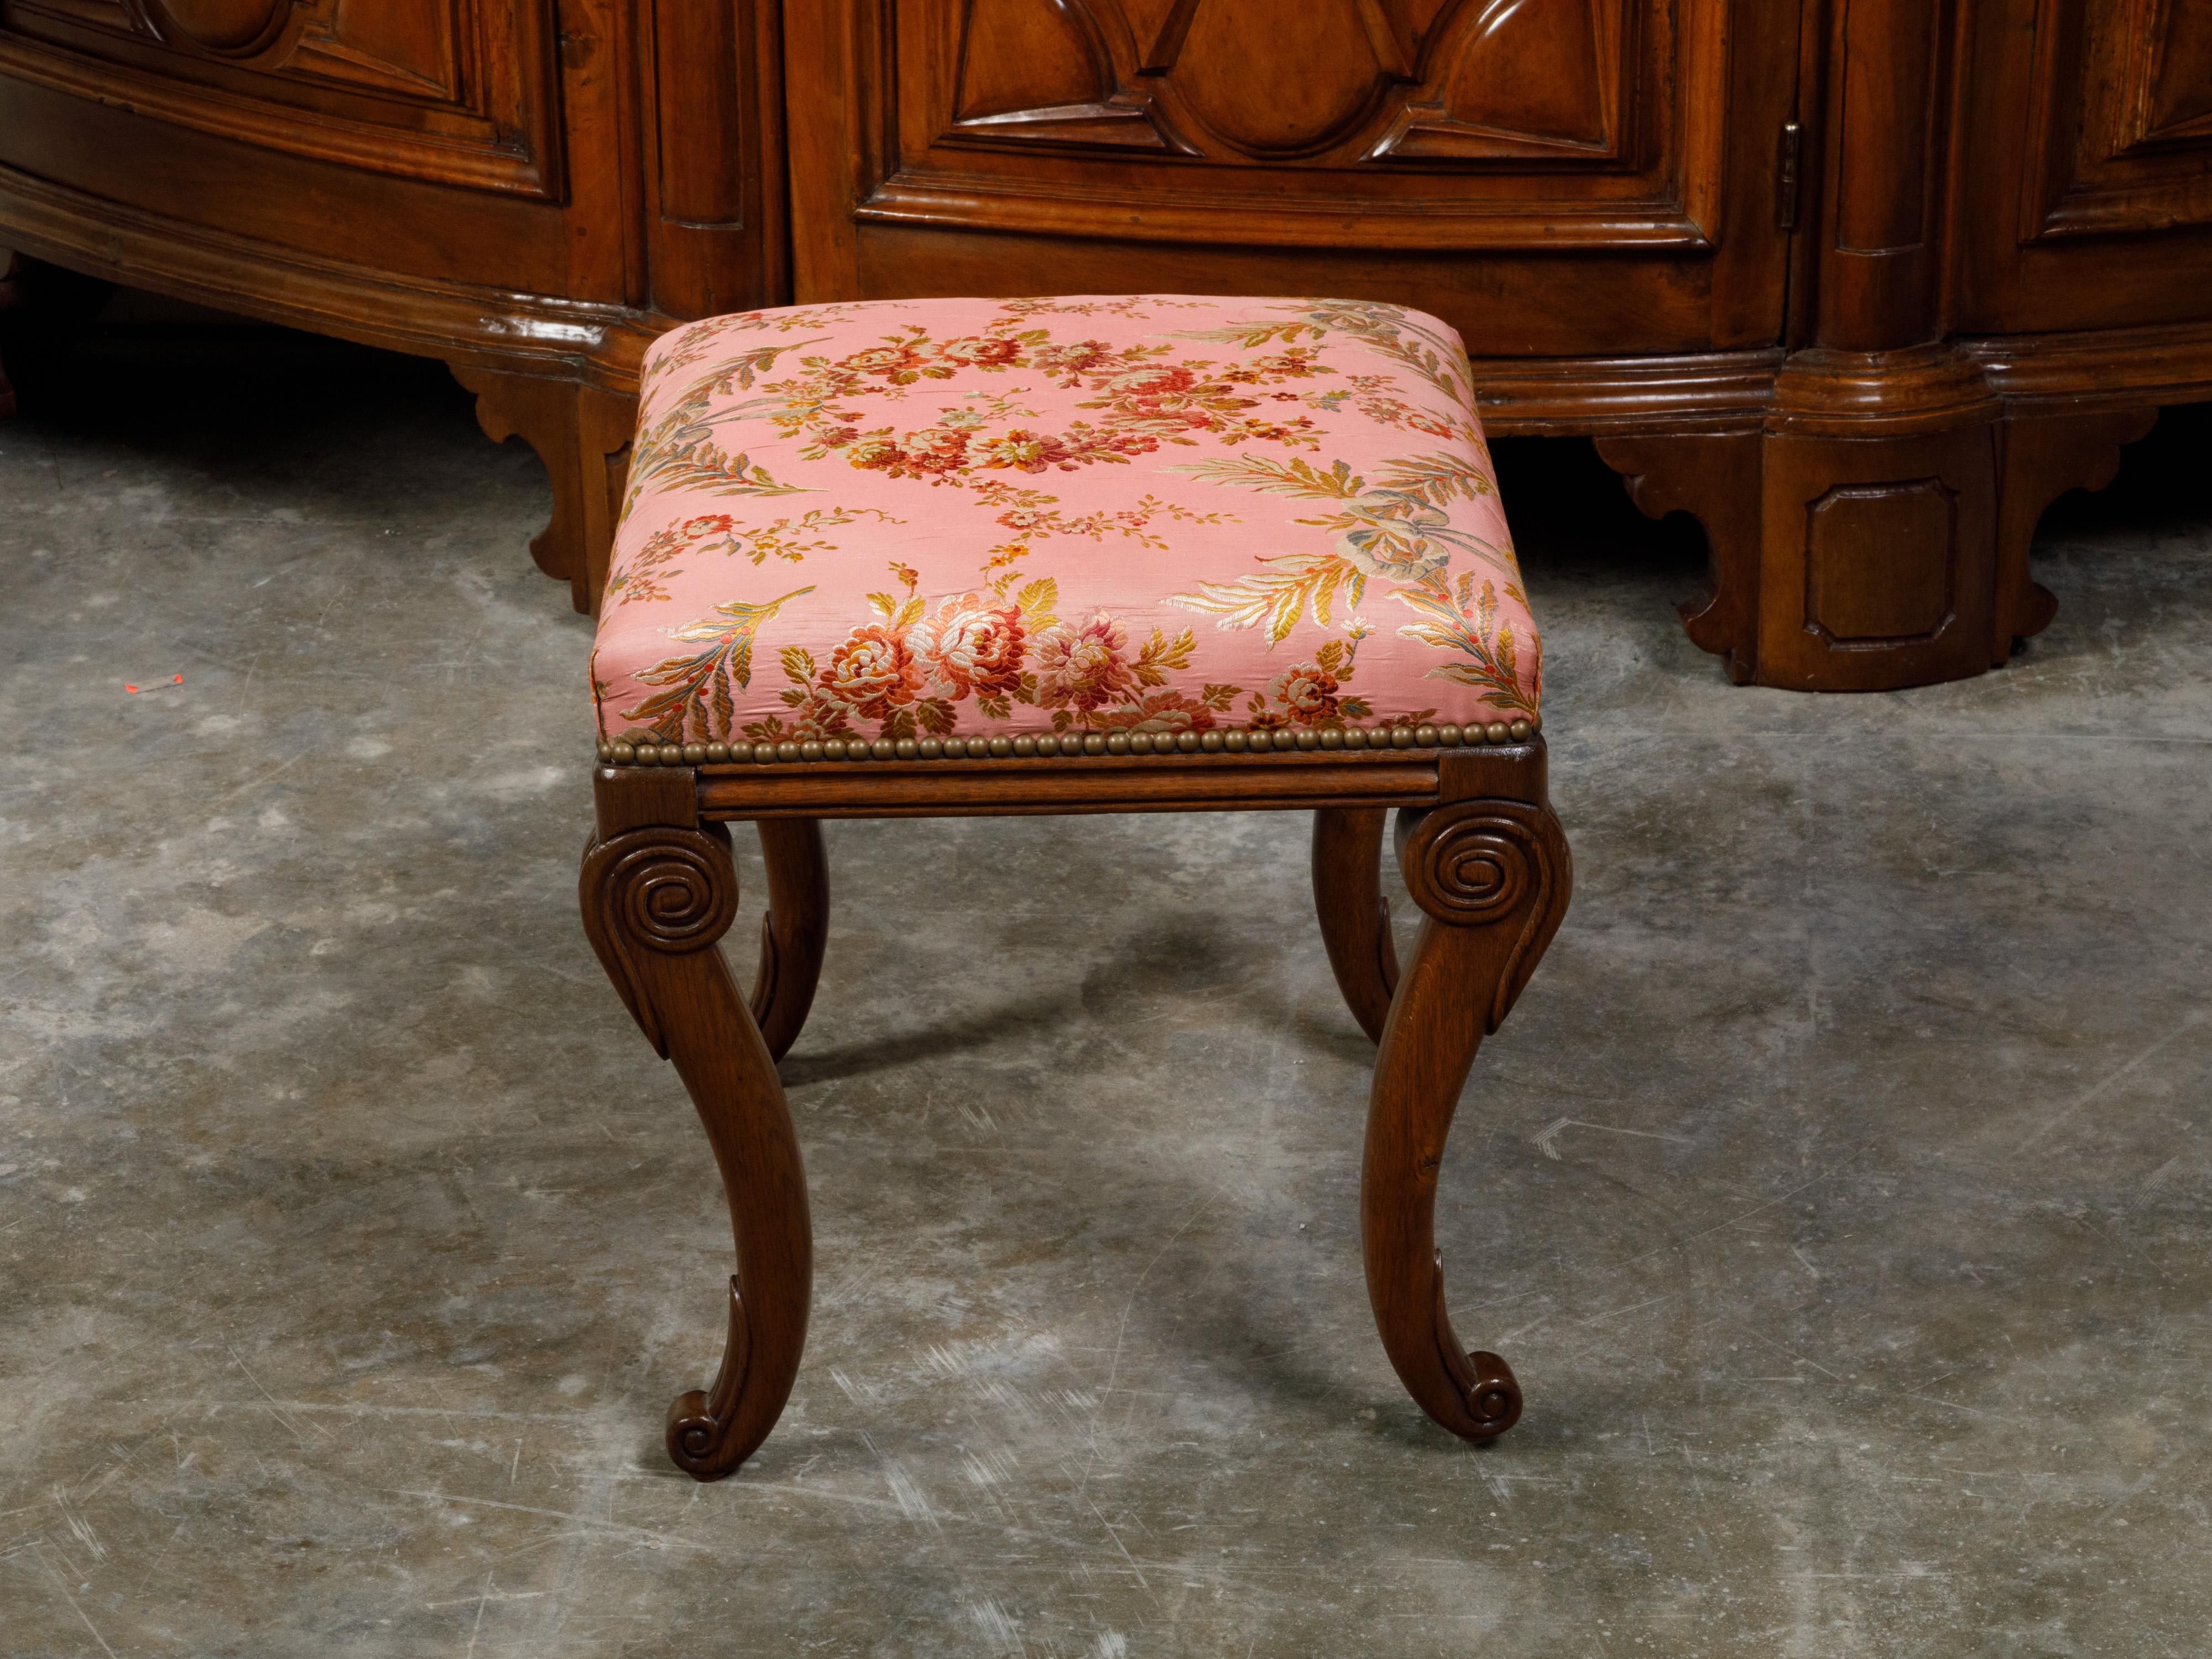 English 1820s Mahogany Stool with Floral Themed Upholstery and Cabriole Legs For Sale 5